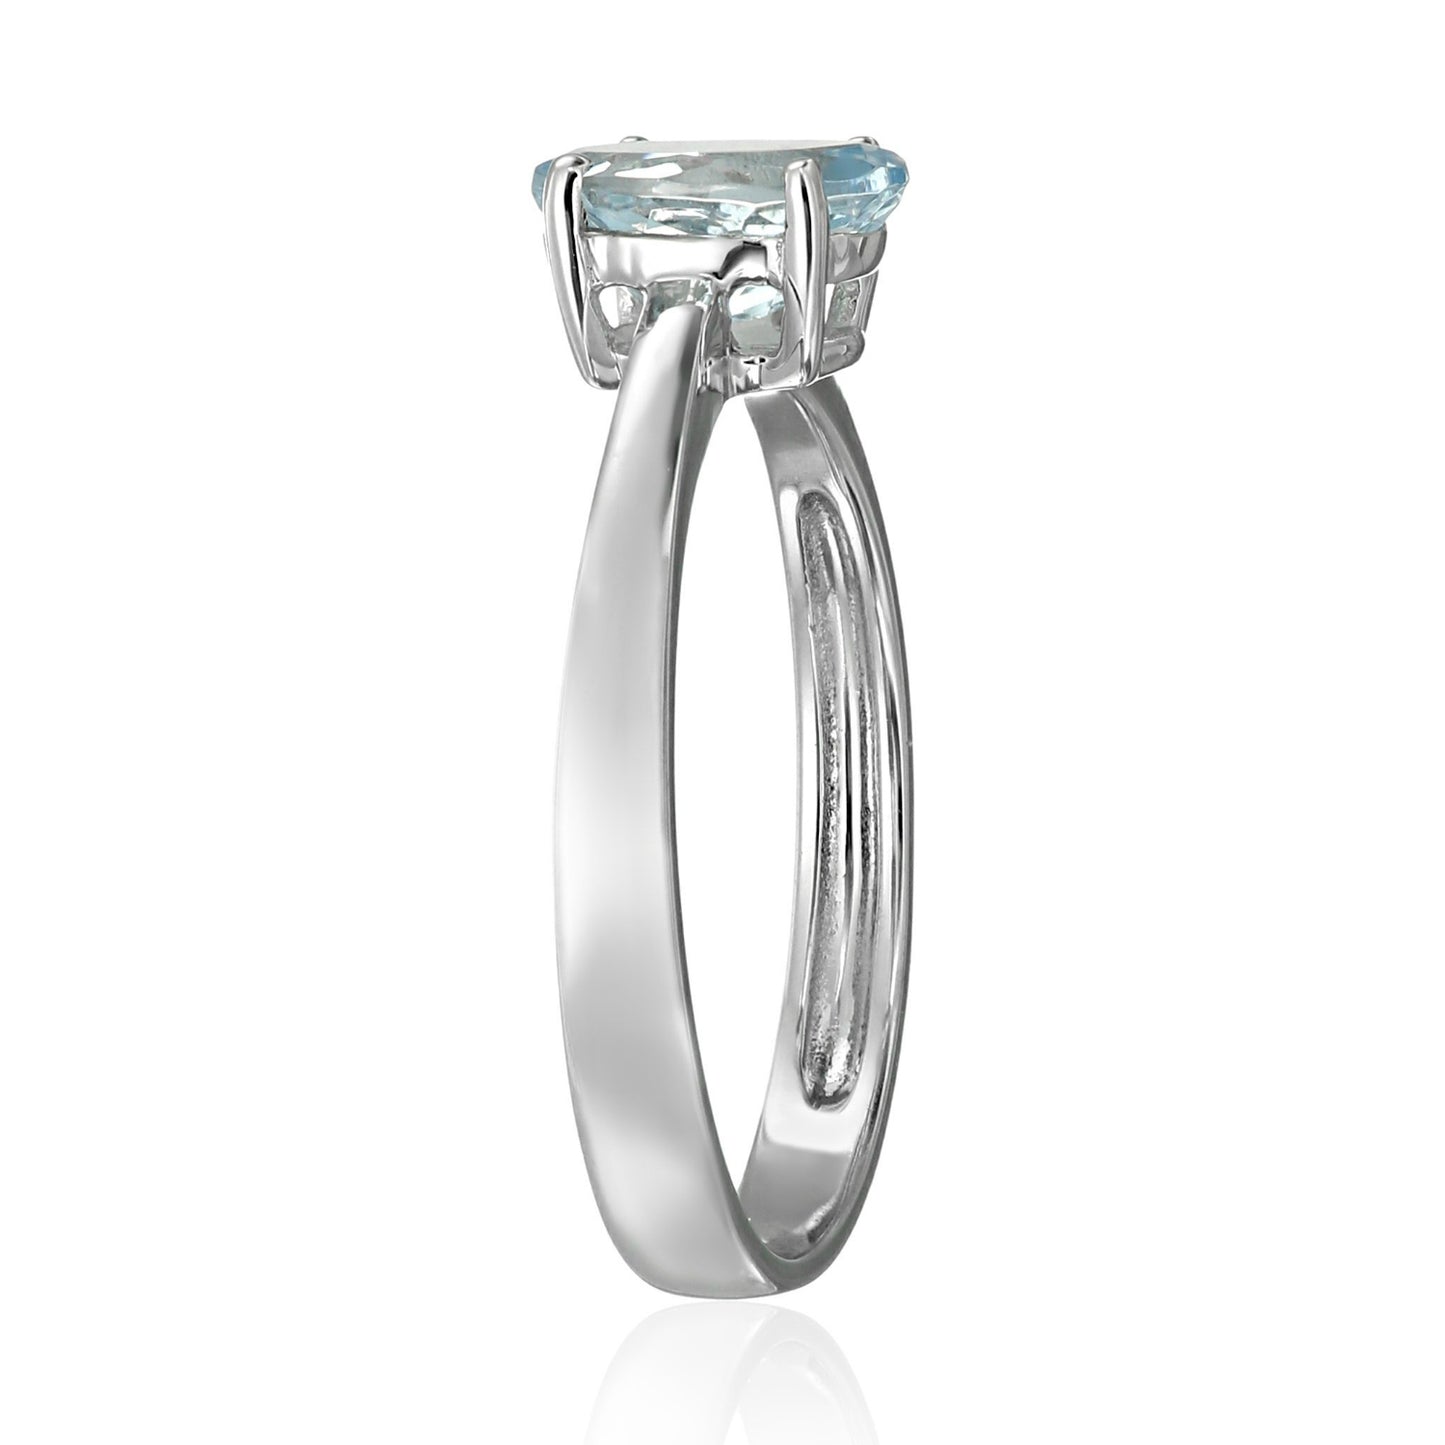 10k White Gold Aquamarine Oval Solitaire Engagement Ring - pinctore